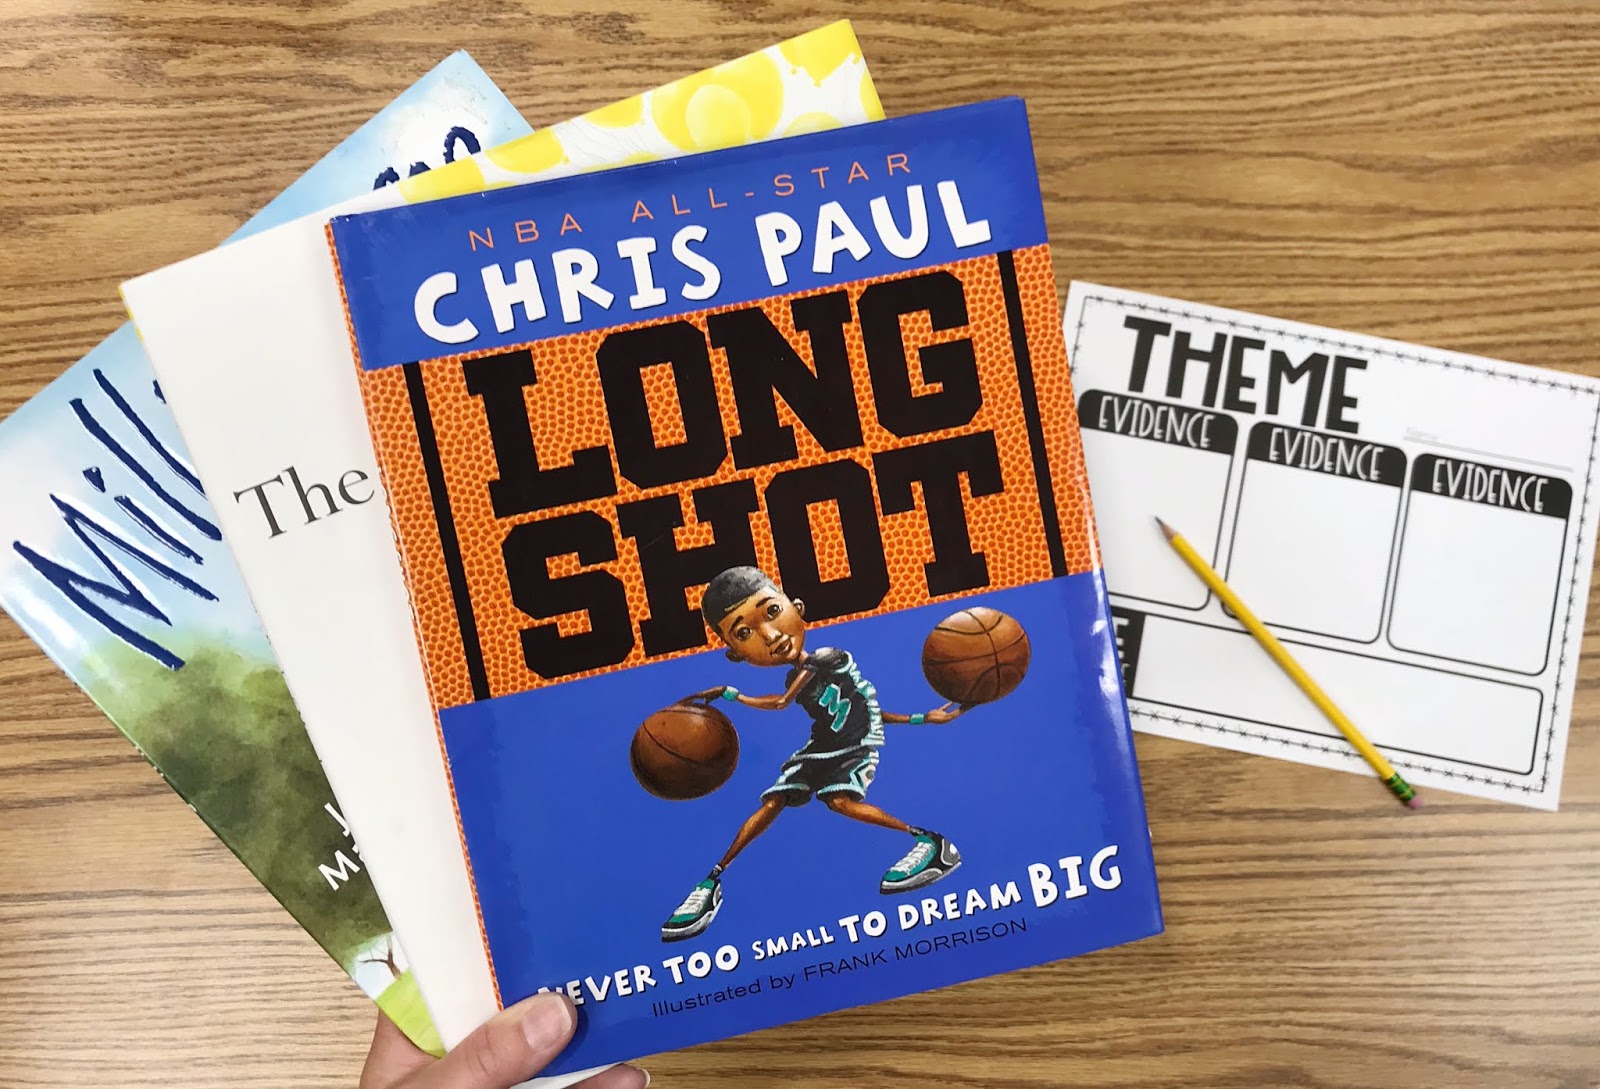 Three Mentor Texts with Graphic Organizer with Text "Theme"